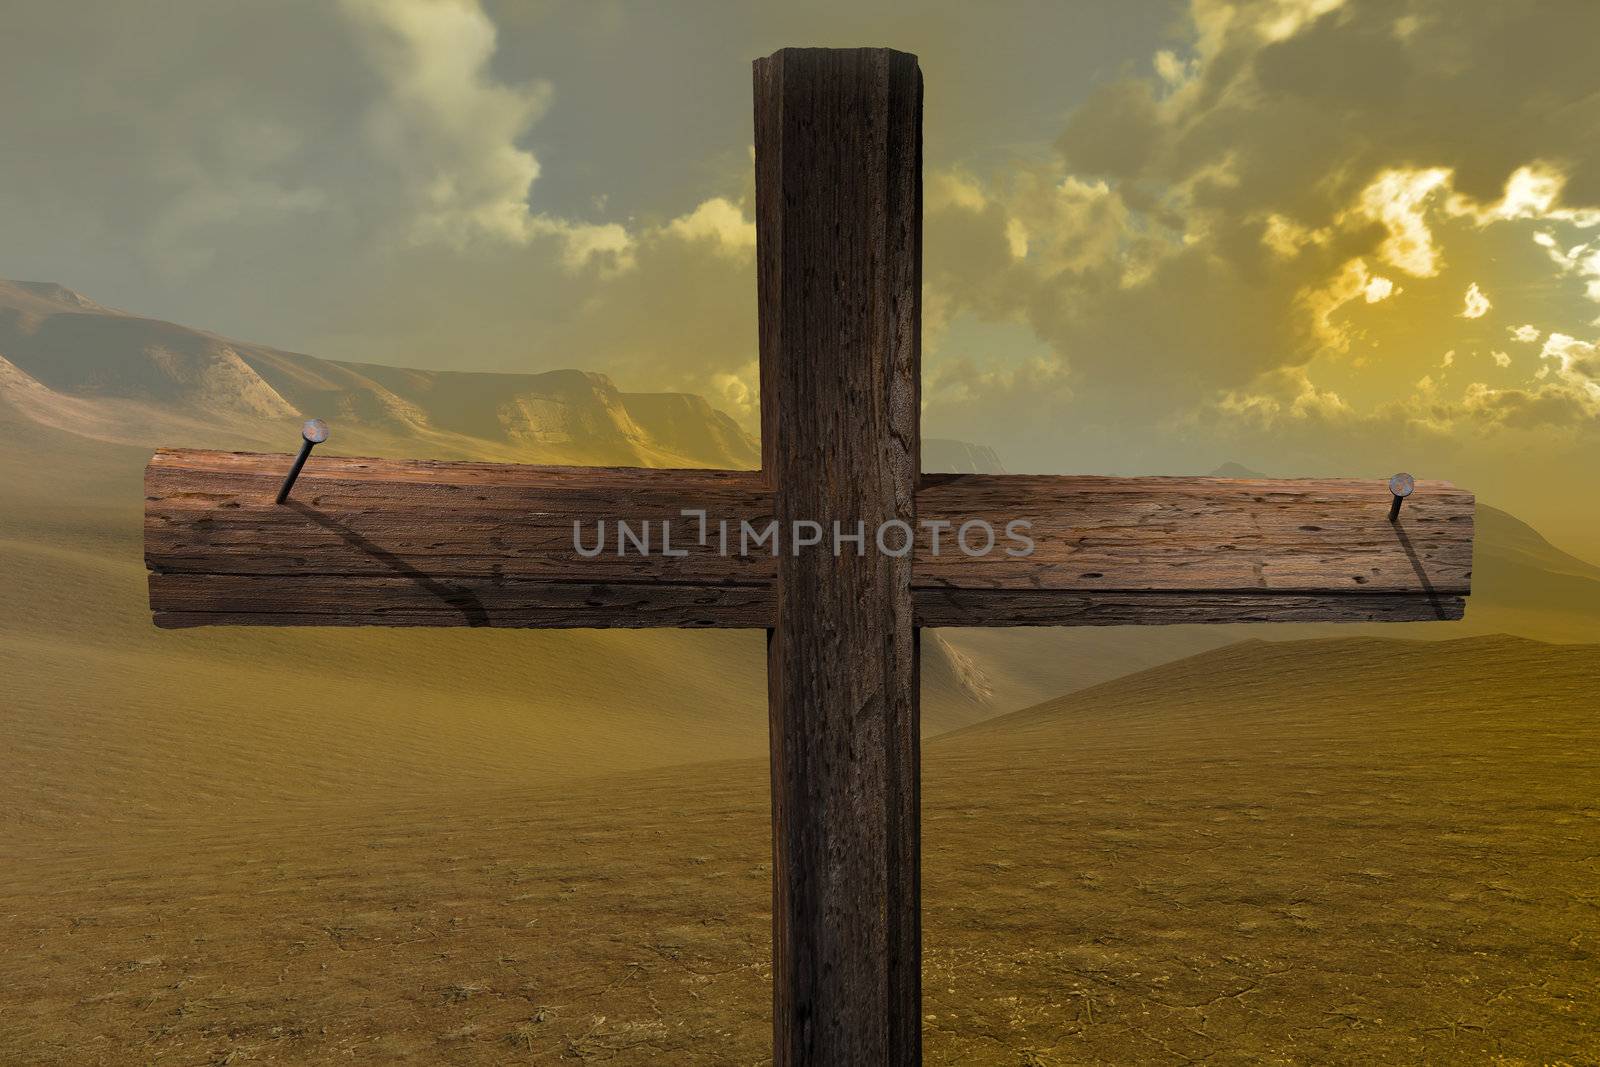 The cross end two nails by vitanovski